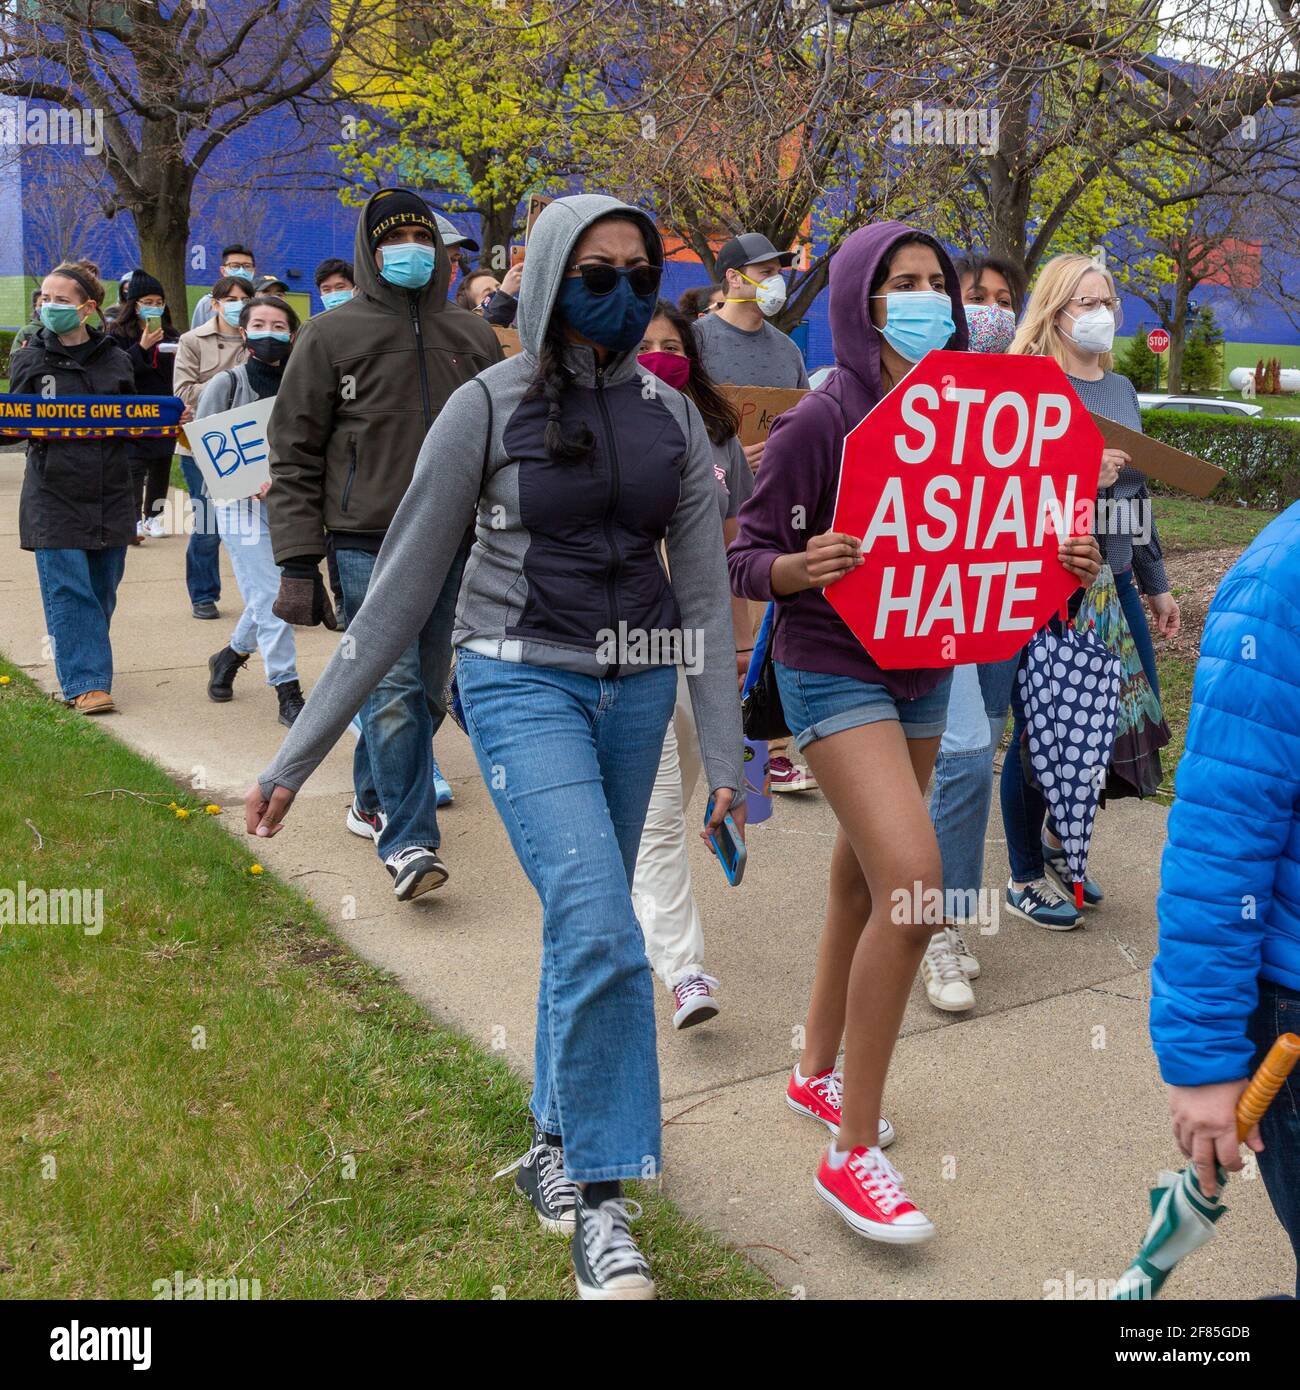 Troy, Michigan, USA. 11th Apr, 2021. A rally protests the increased violence and racism targeting Asian-Americans. The group Stop AAPI Hate has documented 3,800 hate incidents against Asian-Americans in just over a year, including the the killing of six Asian-American women and two others in Atlanta in March. Credit: Jim West/Alamy Live News Stock Photo